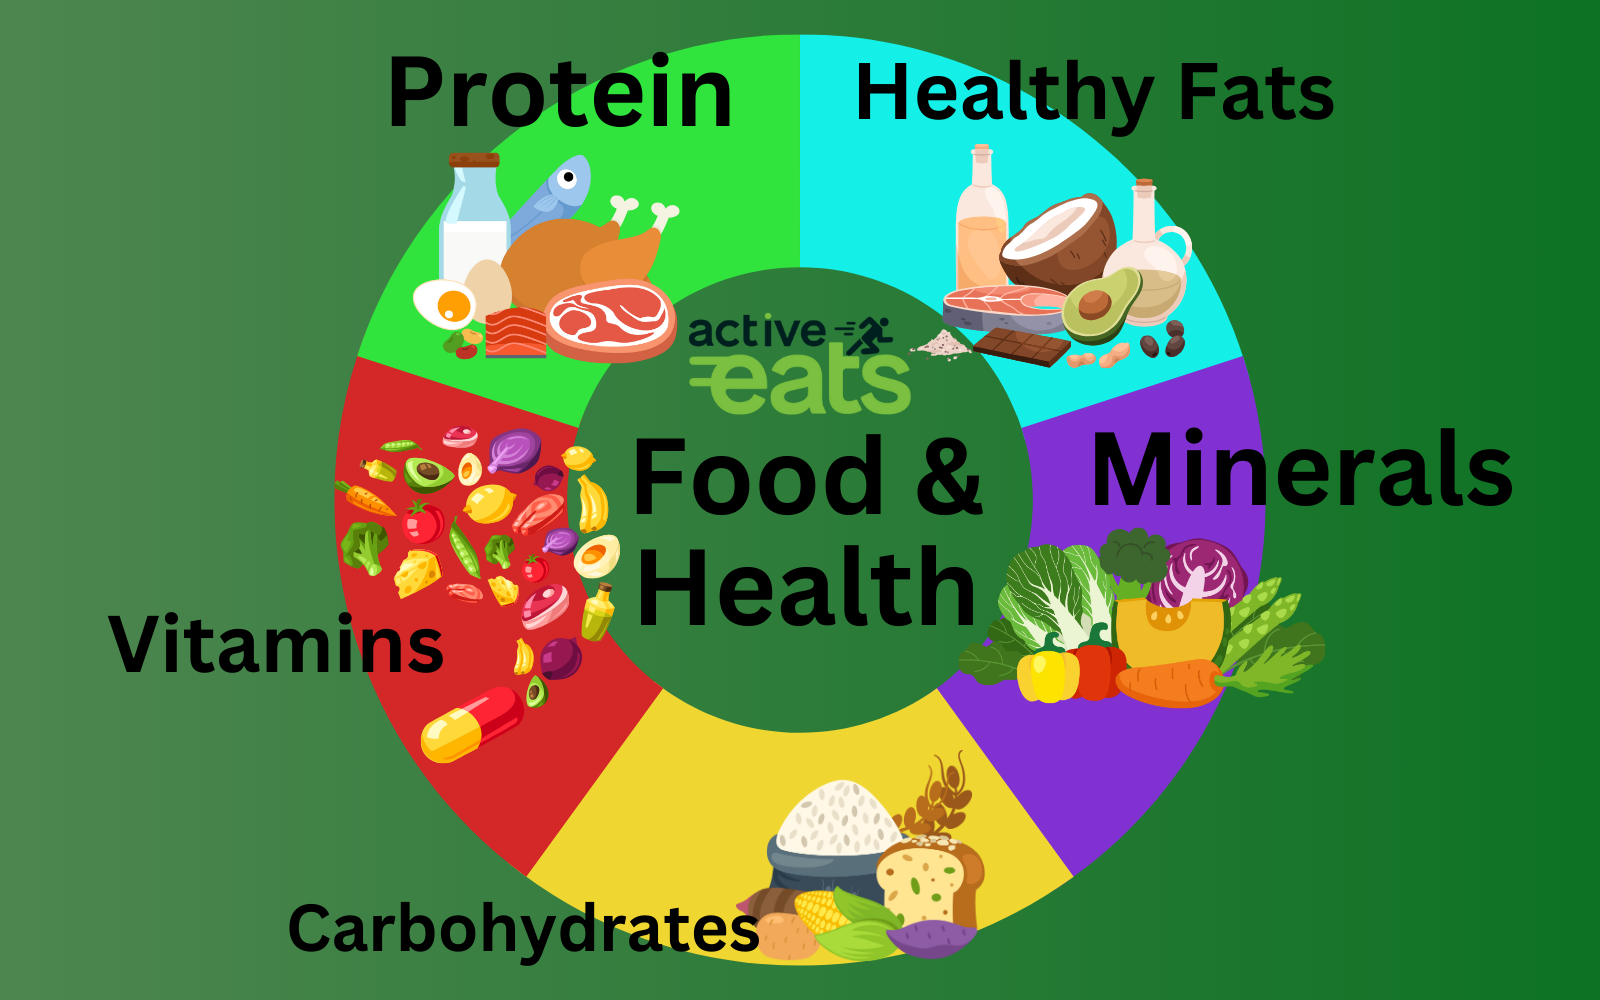 Image showing the Connection of food and health. It represents all the essential nutrients and their food sources needed for the healthy body